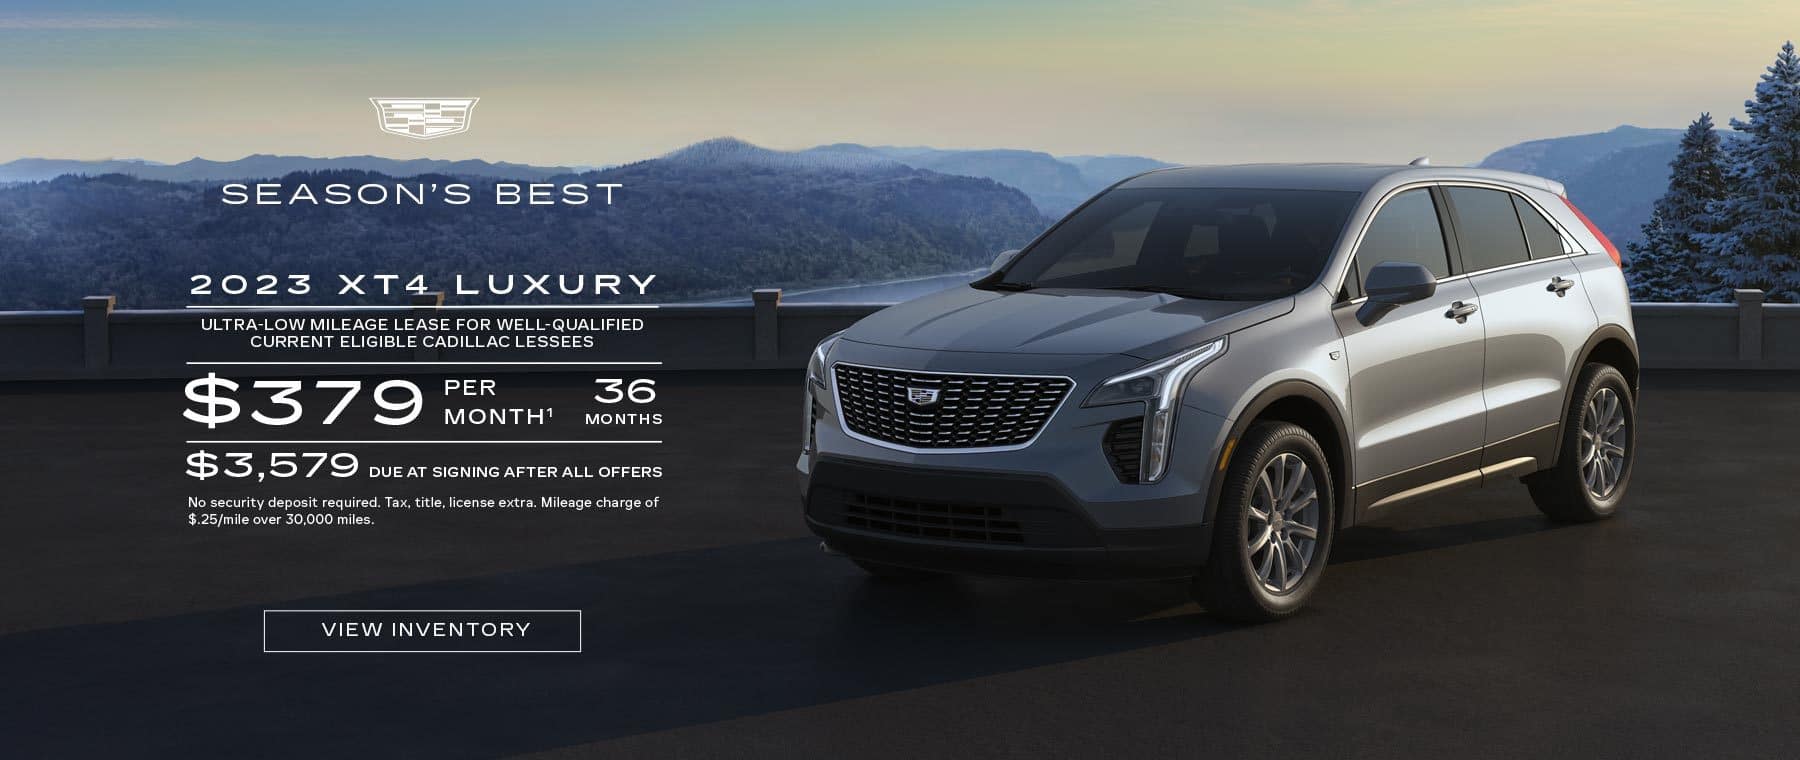 2023 XT4 Luxury. Ultra-low mileage lease for well-qualified current eligible Cadillac lessees. $379 per month. 36 months. $3,579 due at signing after all offers.